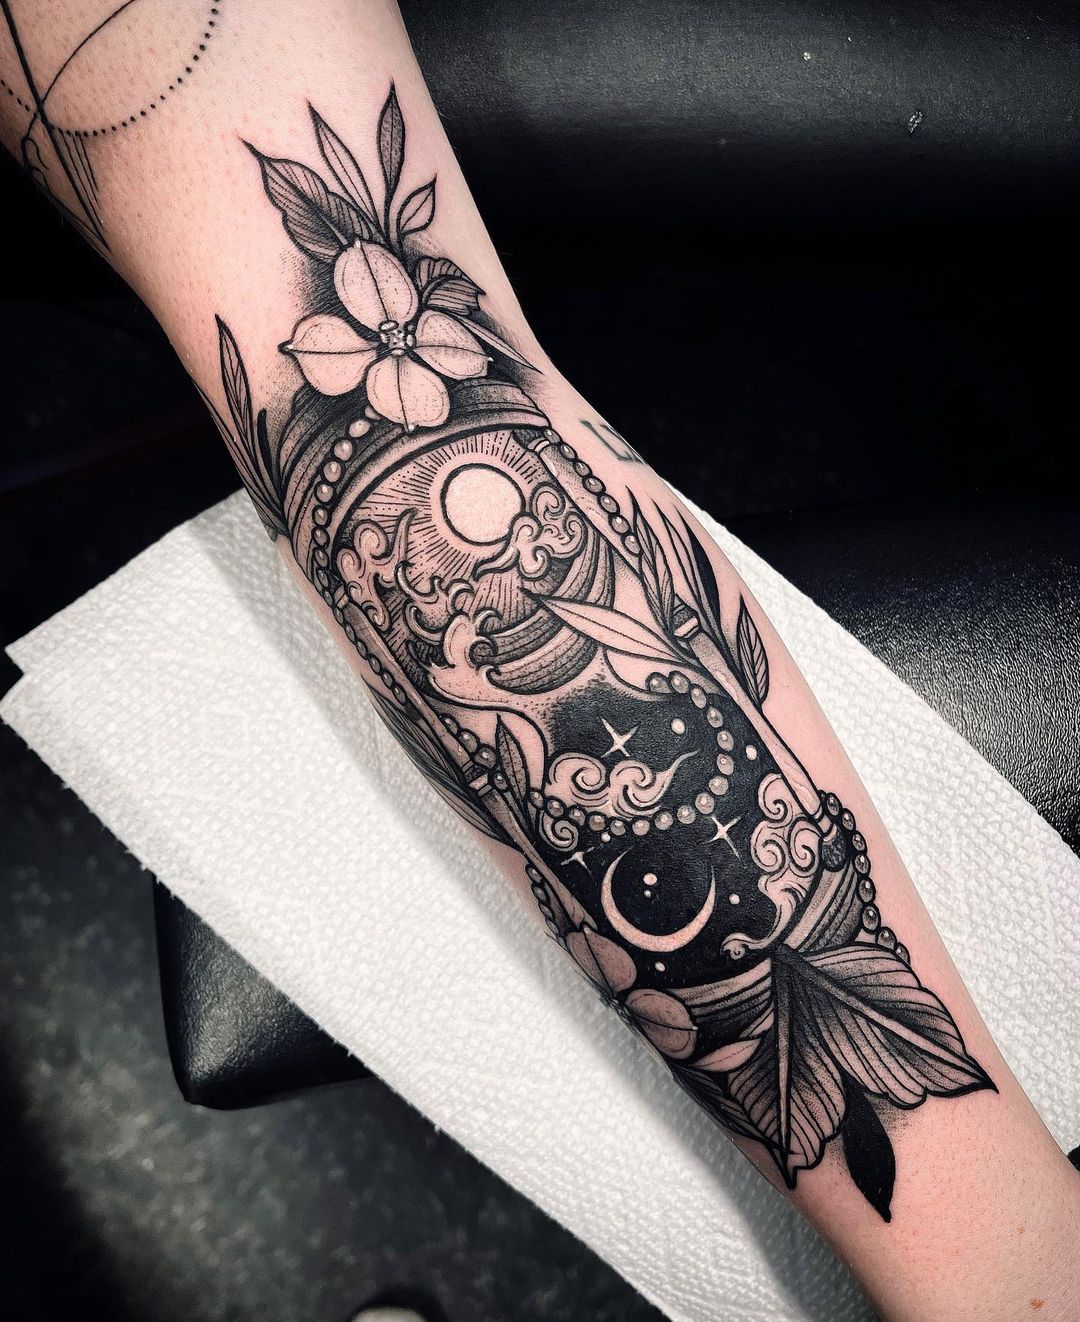 Black and grey style sleeve tattoo